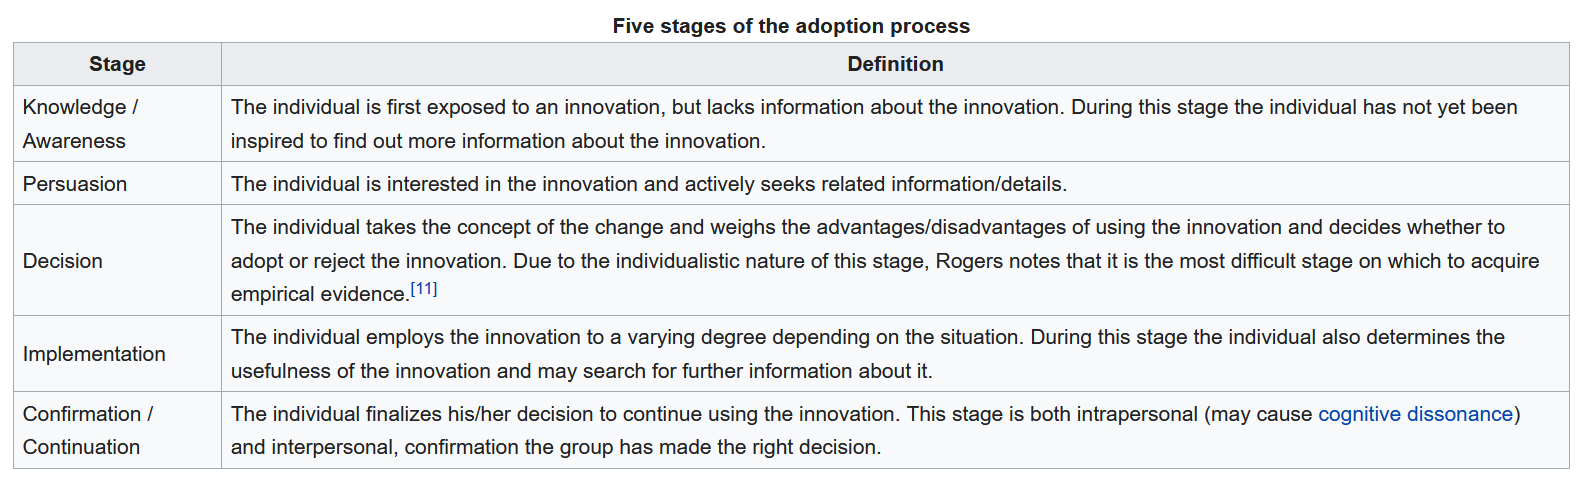 5 stages of the adoption process for technology